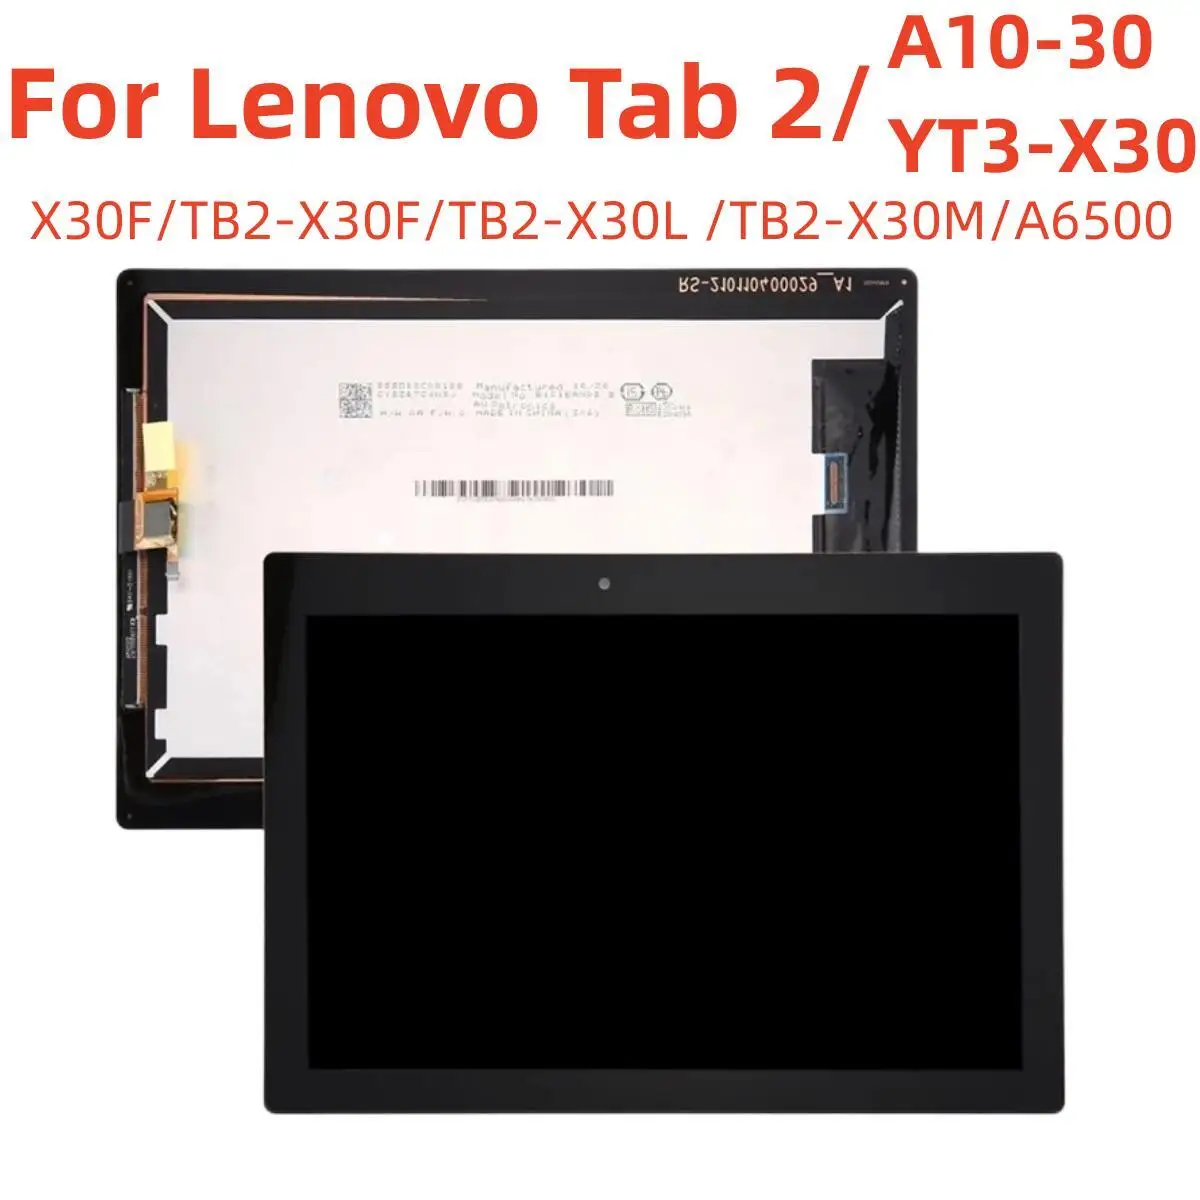 

10.1" LCD For Lenovo Tab 2 A10-30 YT3-X30 X30F TB2-X30F tb2-x30l tb2-x30m a6500 Display Panel Touch Screen Digitizer with frame